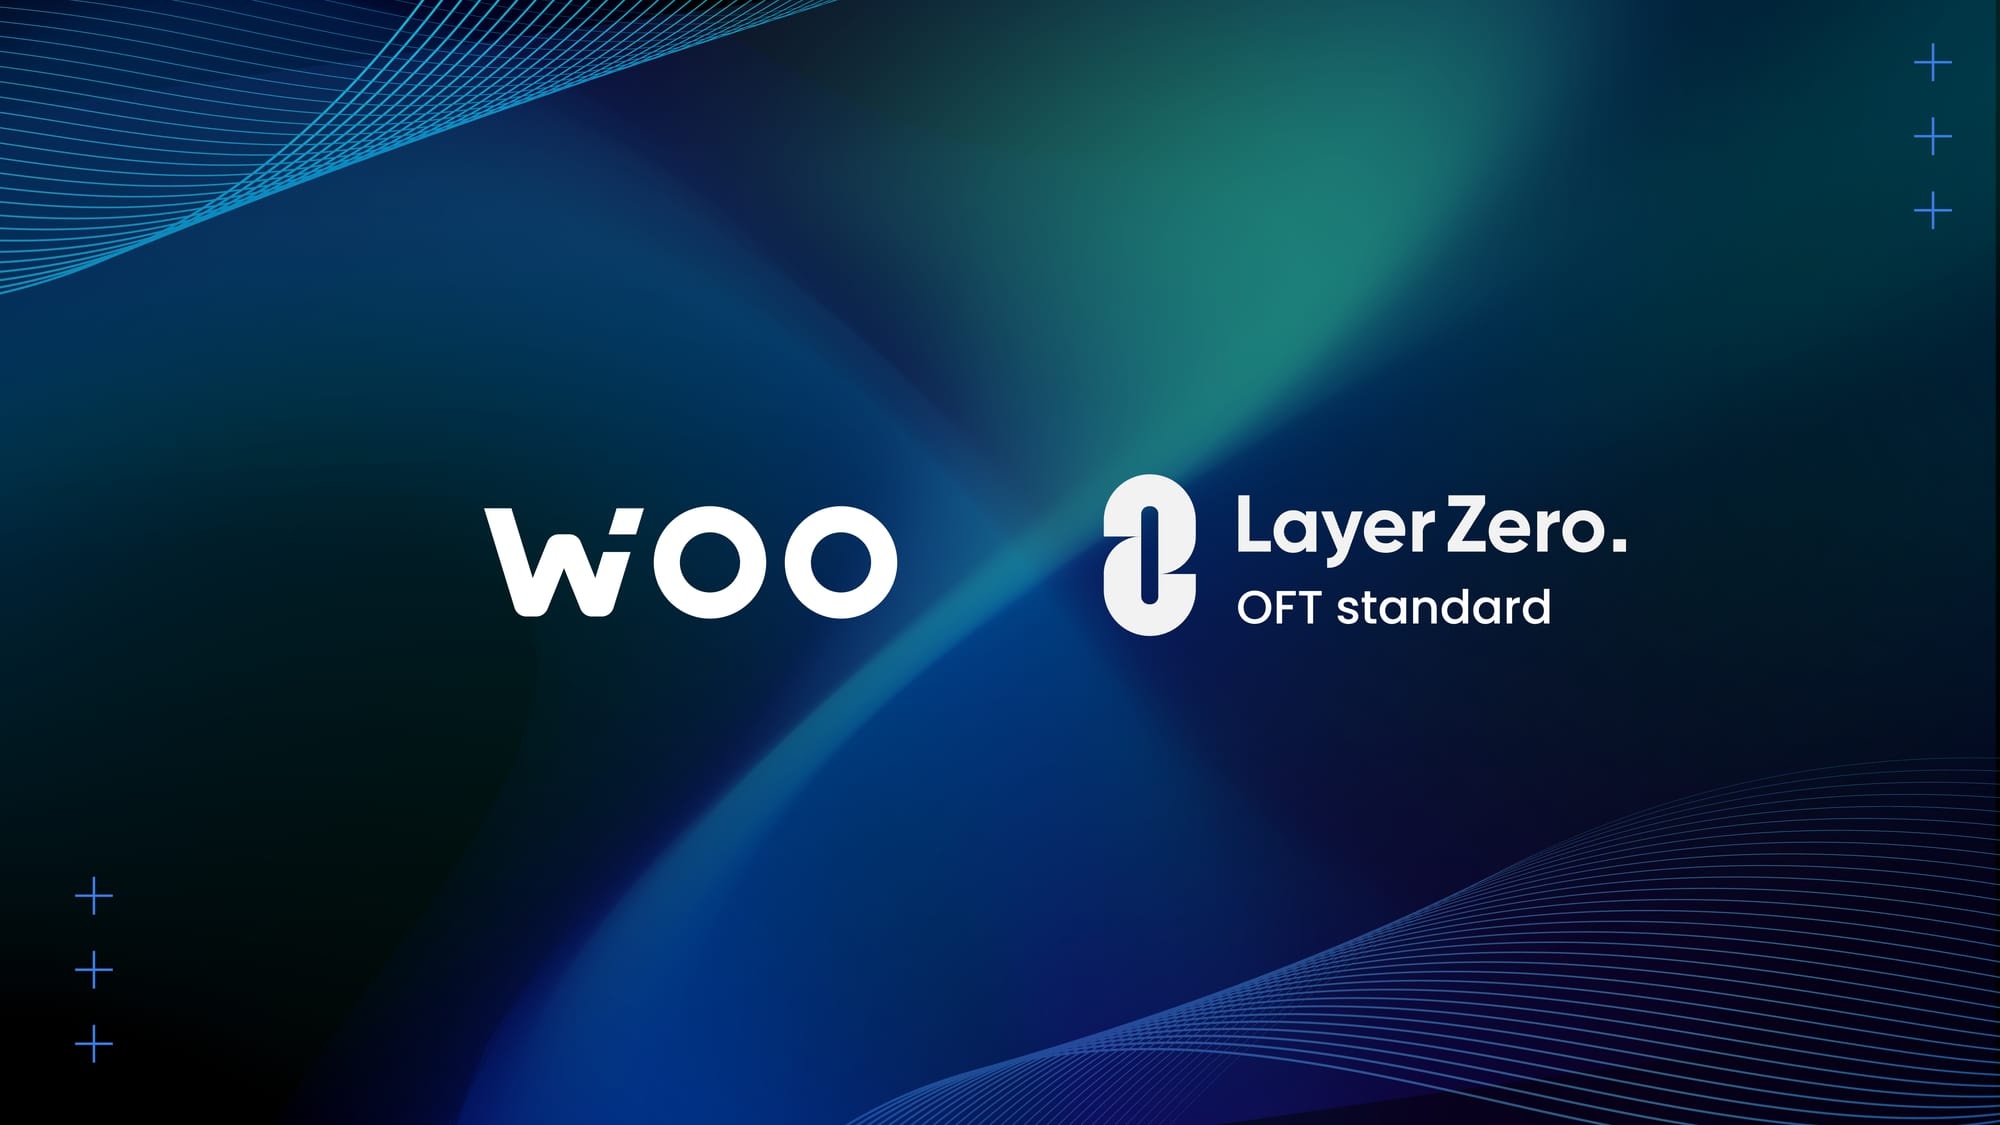 WOO adopts LayerZero's OFT standard in a strategic push to further maximize the token utility